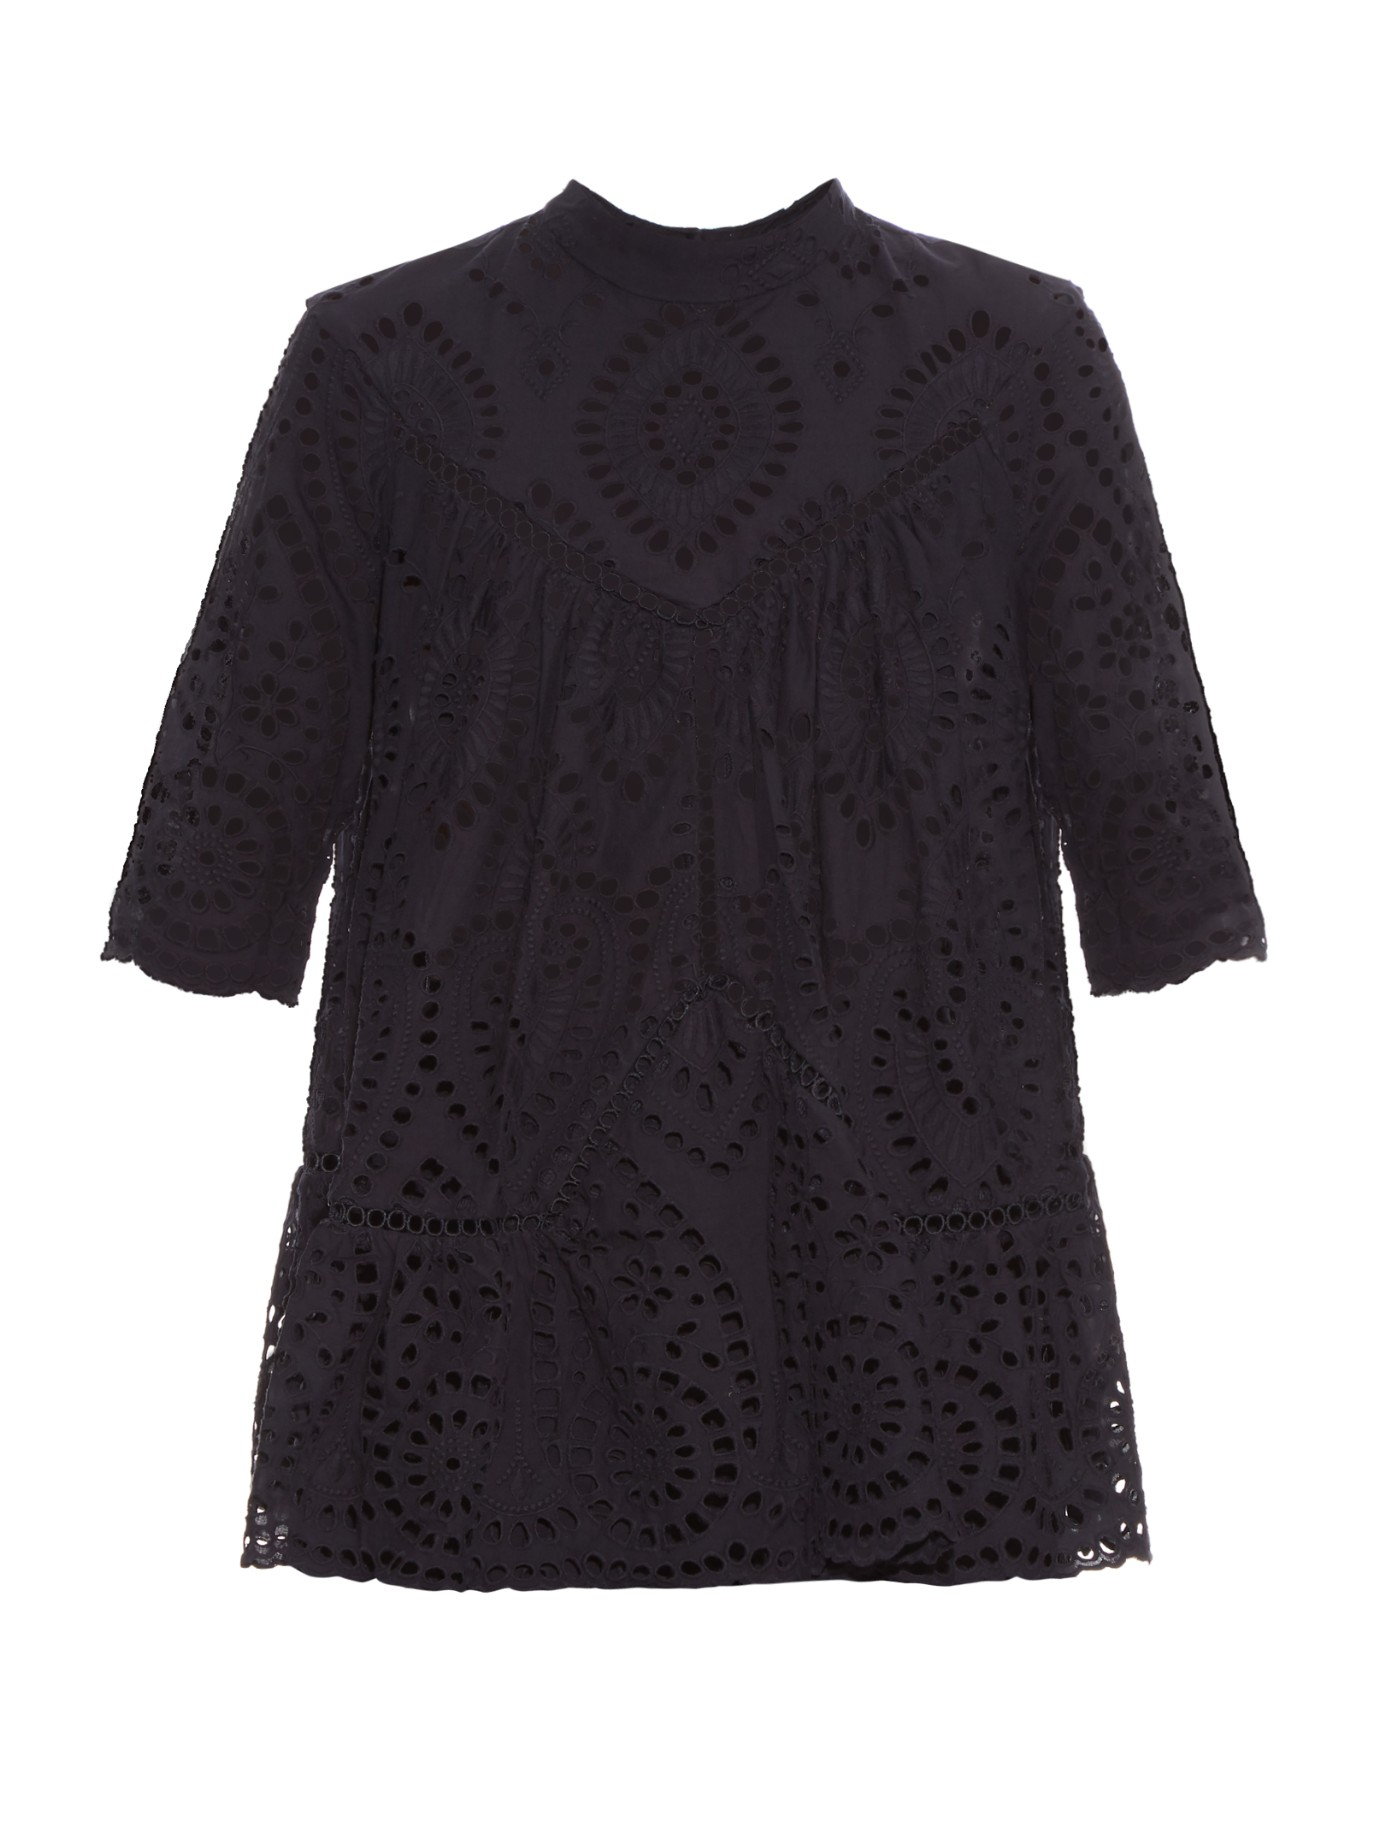 Zimmermann Lace Harlequin Broderie-anglaise Top in Navy (Black) - Lyst